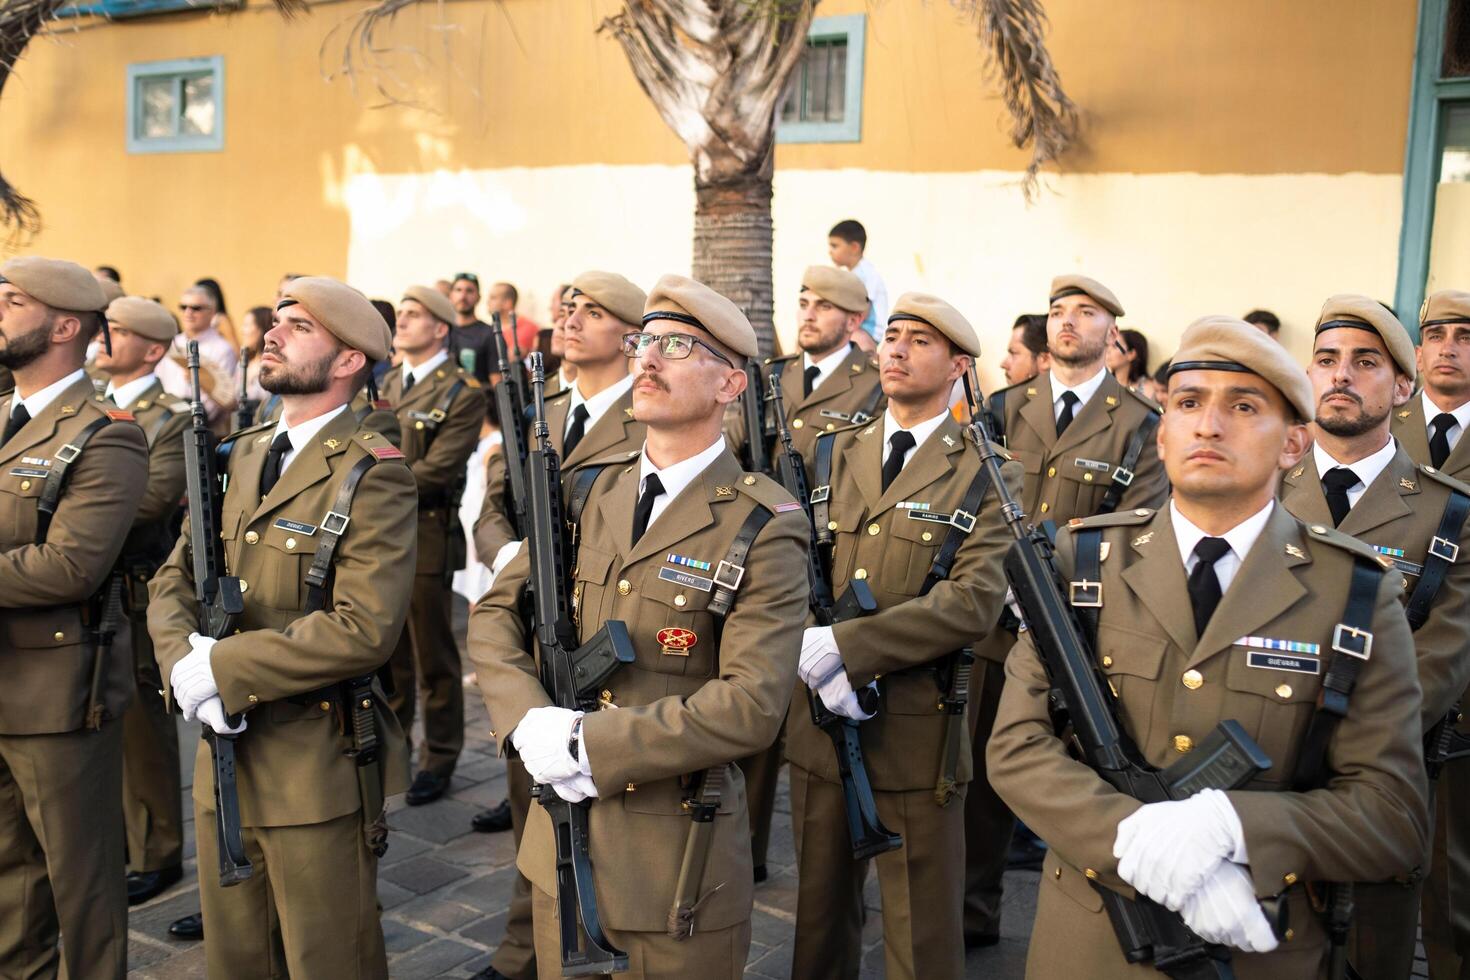 July 25, 2019. A guard of honor greets a guest in the City of Santa Cruz de Tenerife. Canary Islands, Spain photo